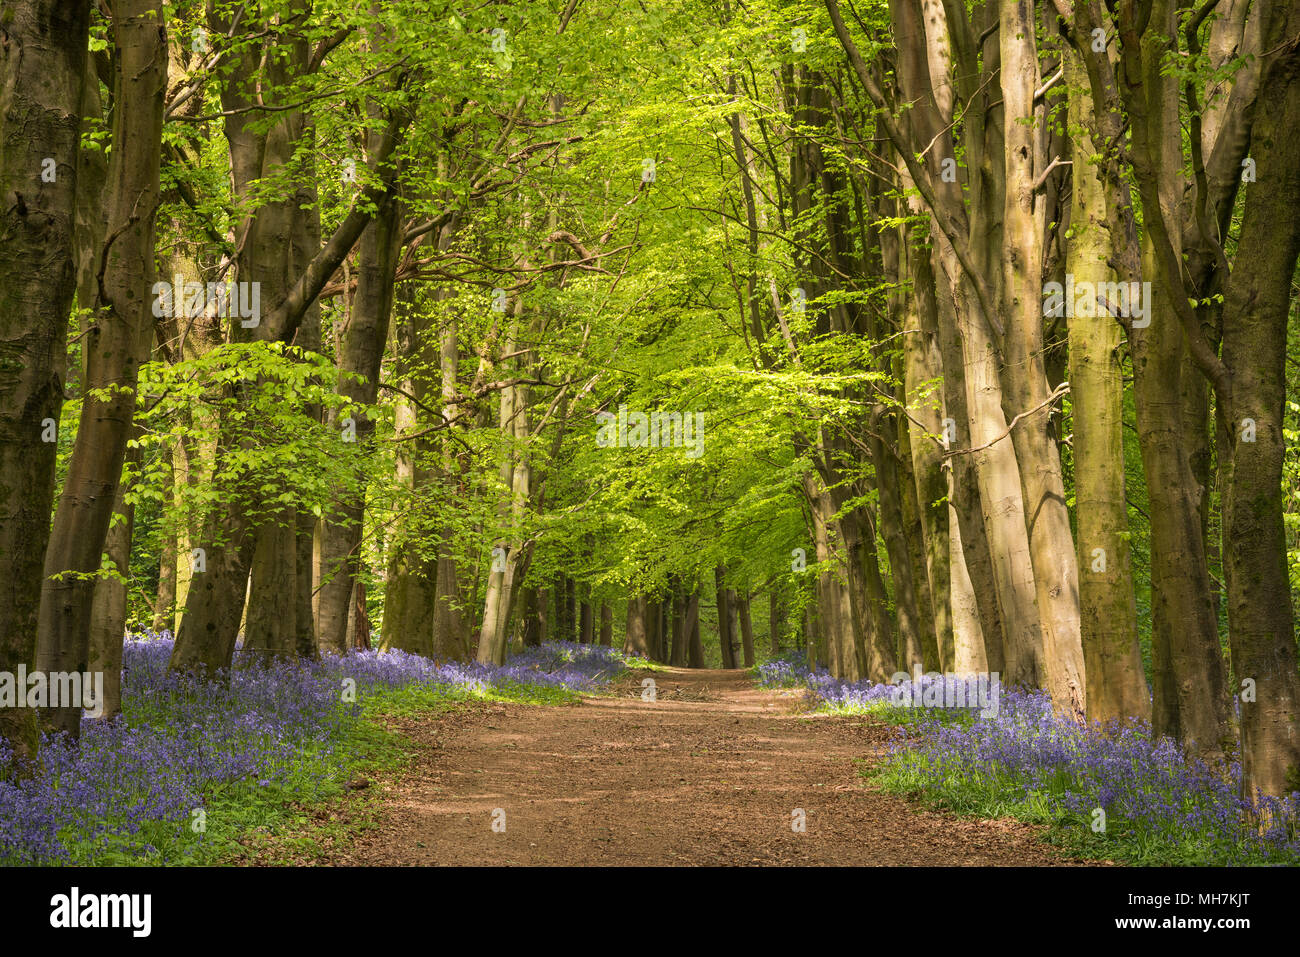 A Hampshire avenue through Beech trees lined with native English Bluebells (Hyacinthoides non-scripta) on a sunny morning in May. Stock Photo